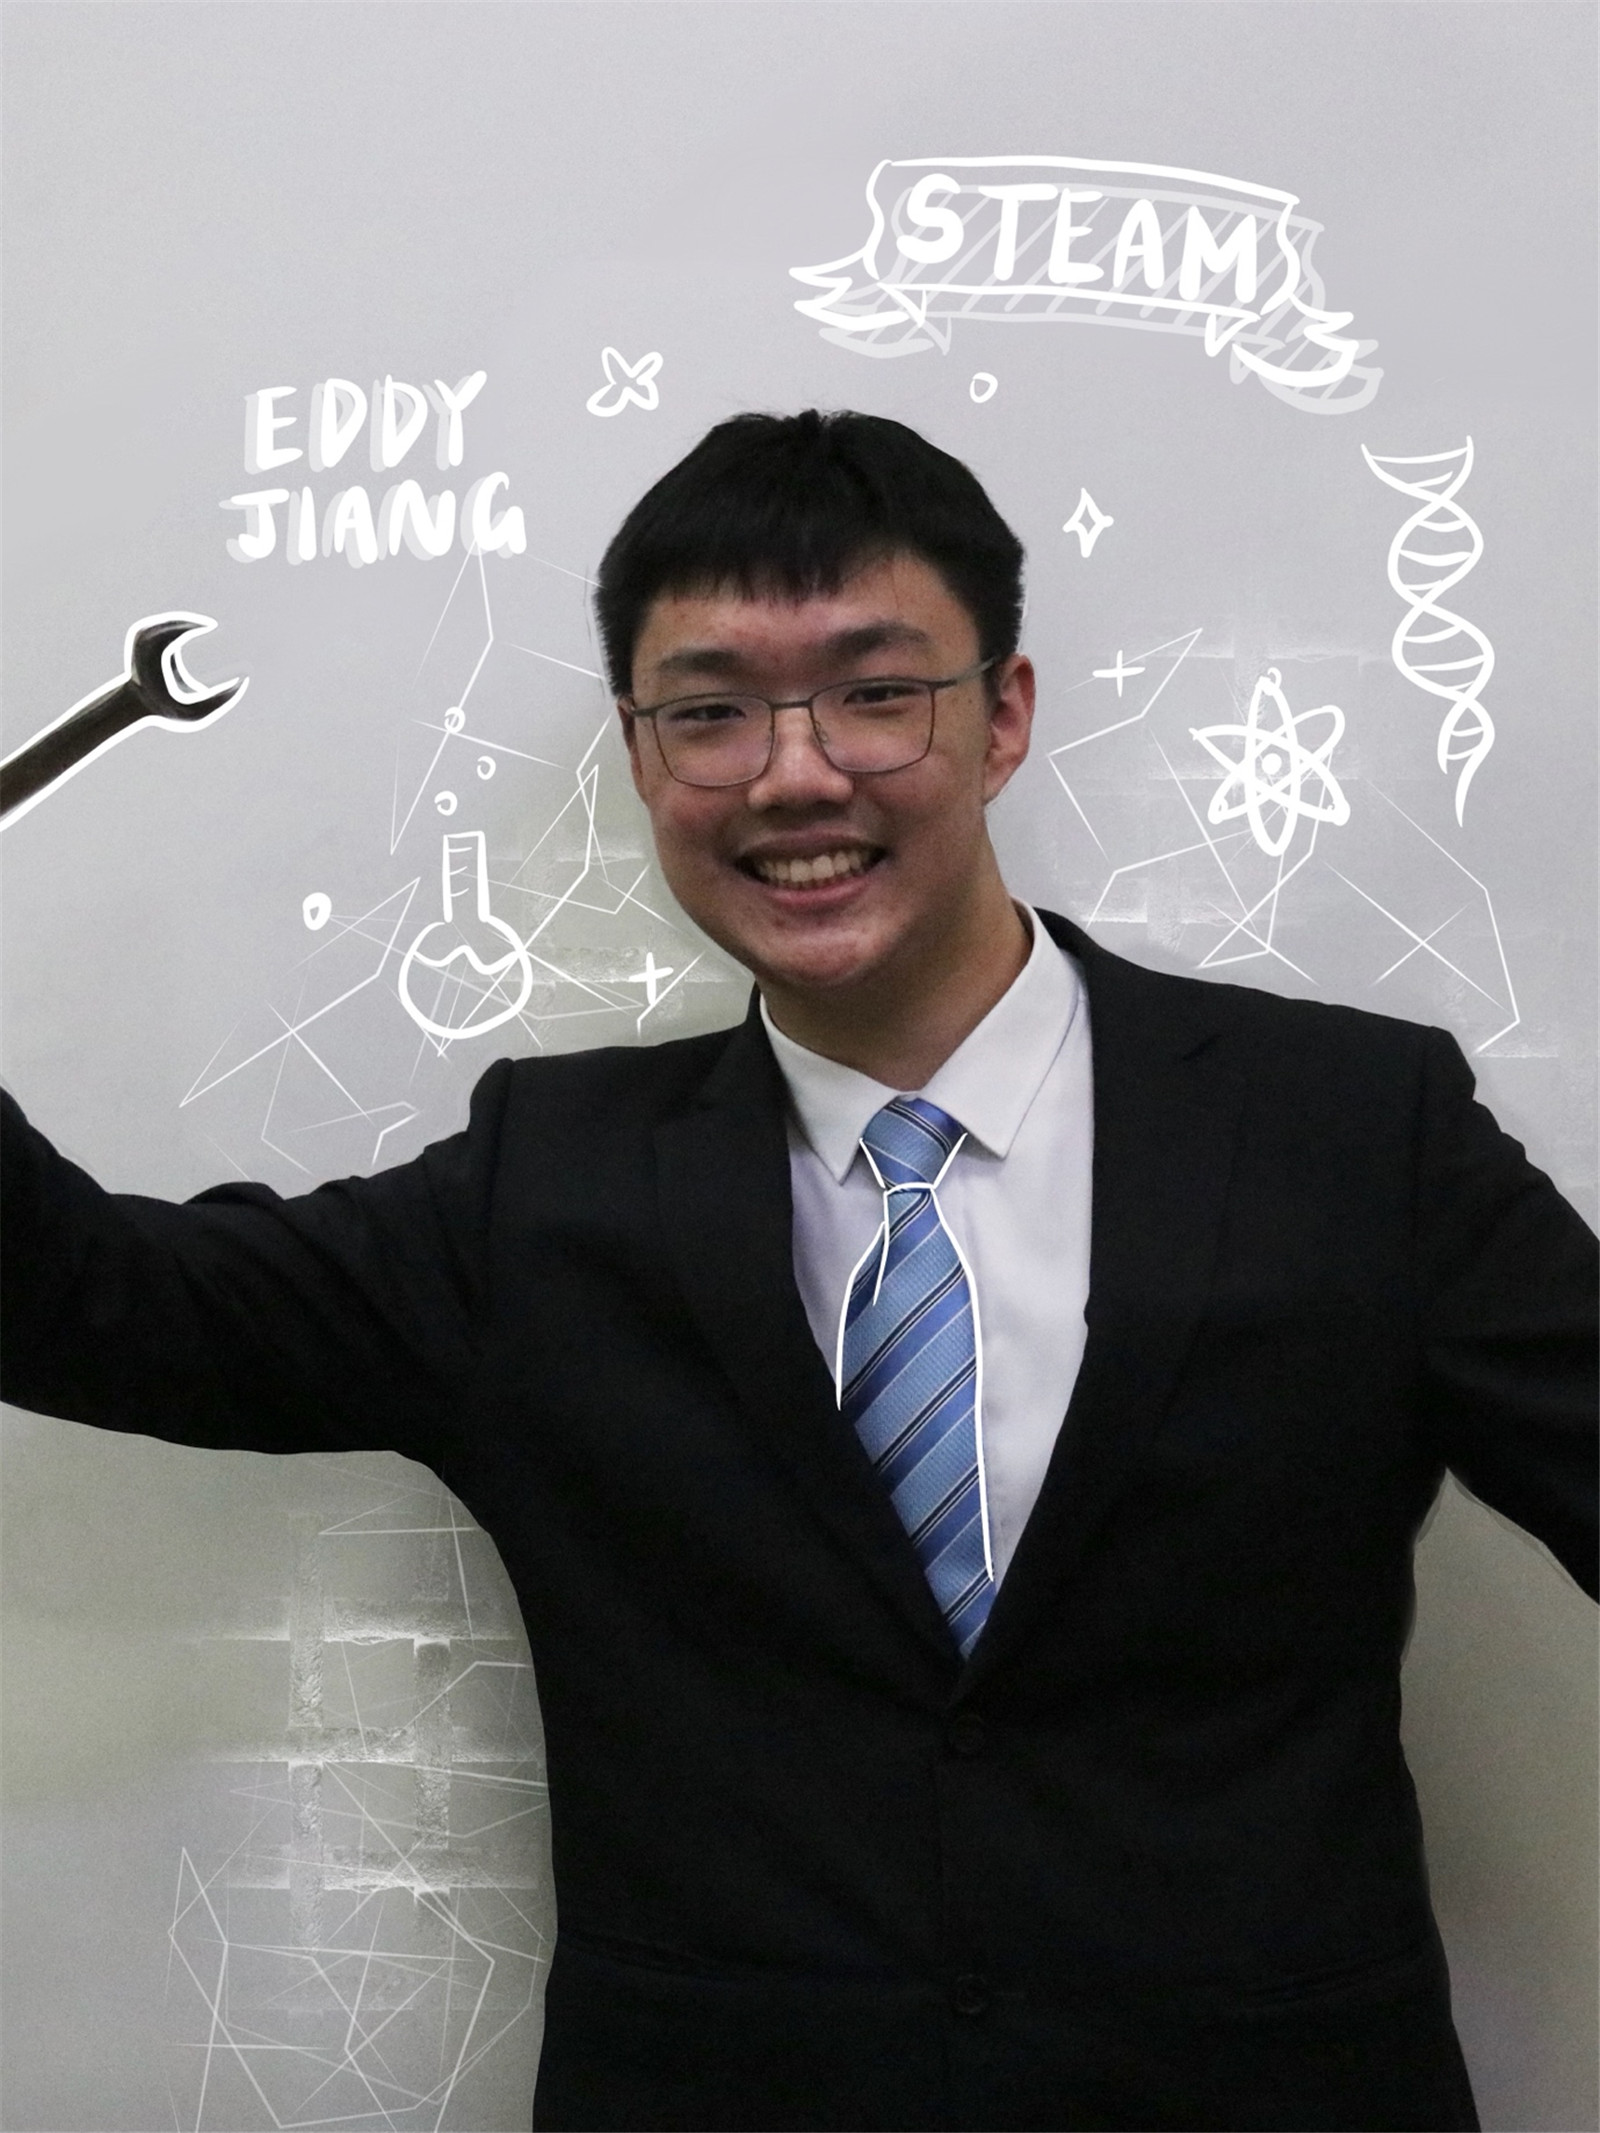 Eddy holding a wrench in his STEAM Prefect photo